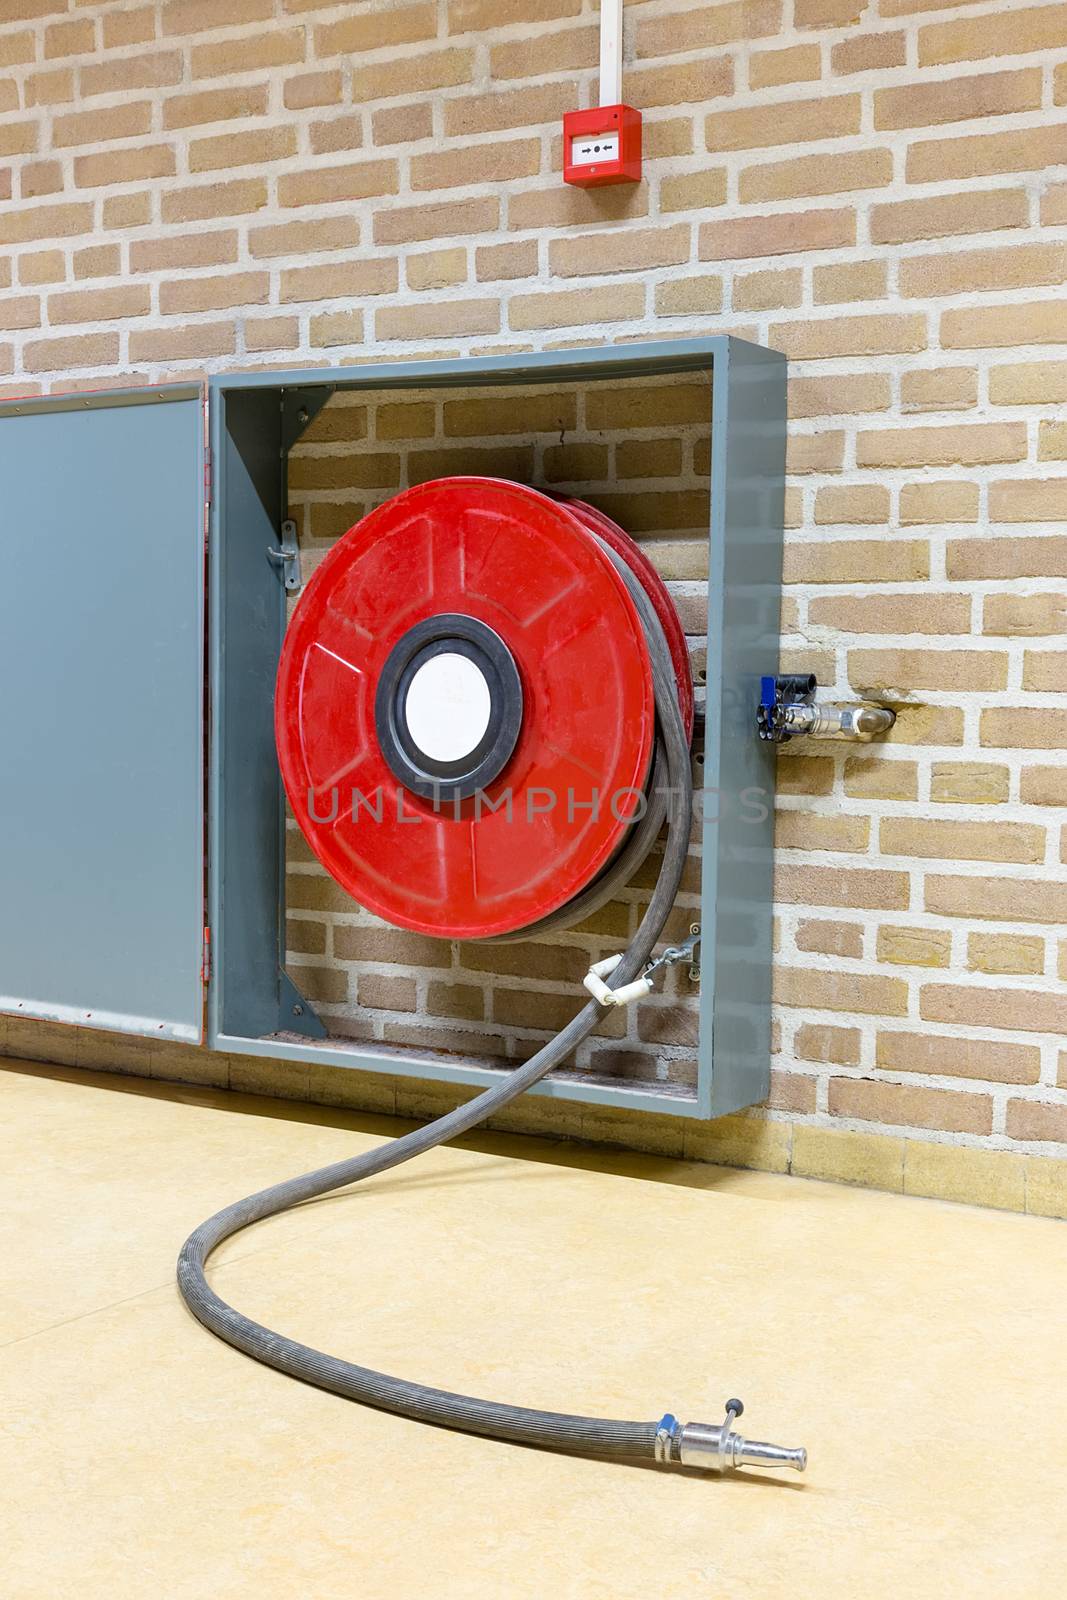 Red fire hose on reel hanging at wall in school building